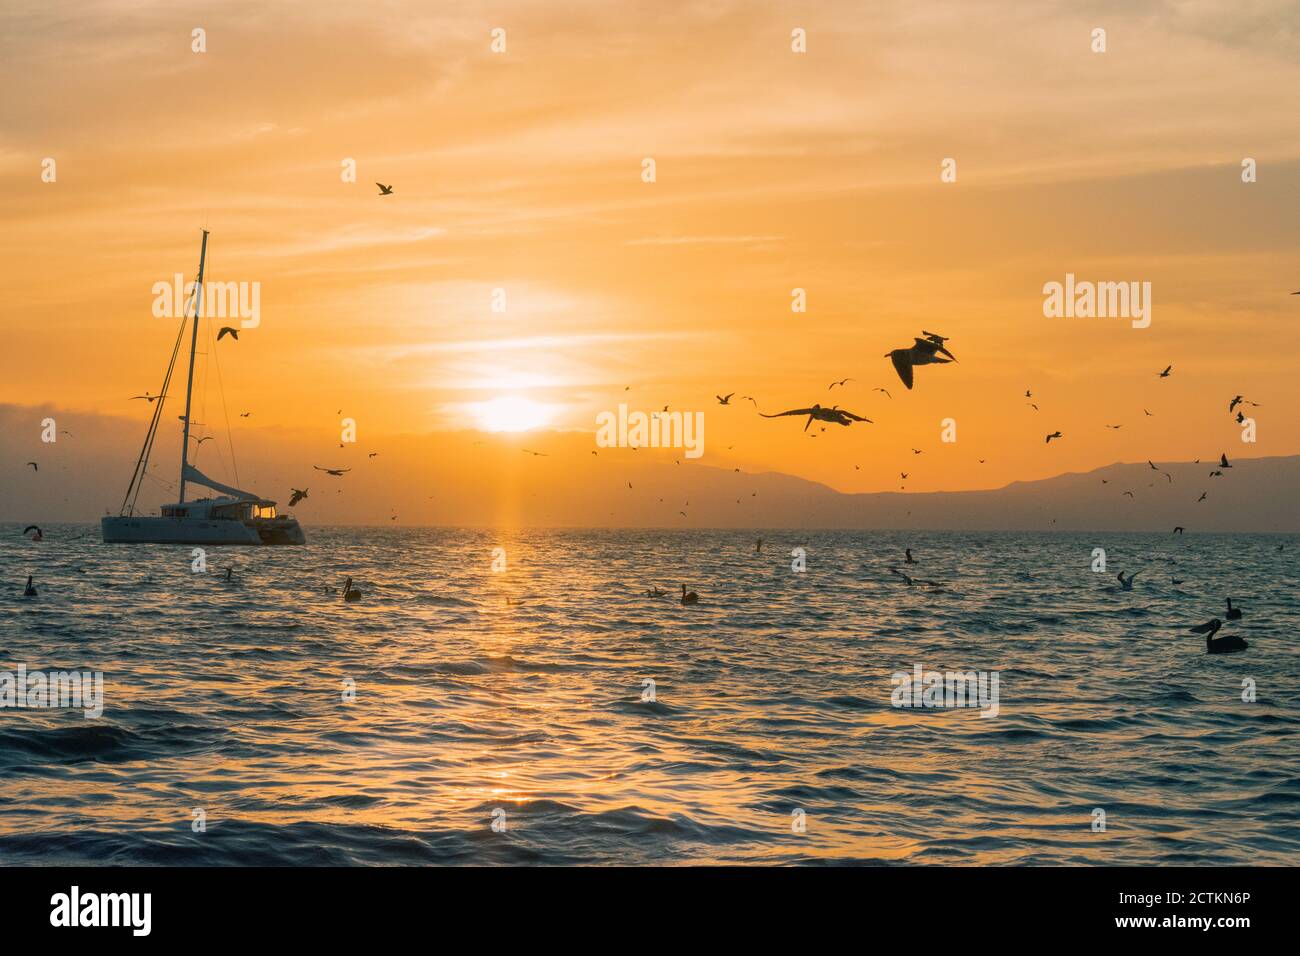 Boat in the sea and birds flying around during sunset Stock Photo